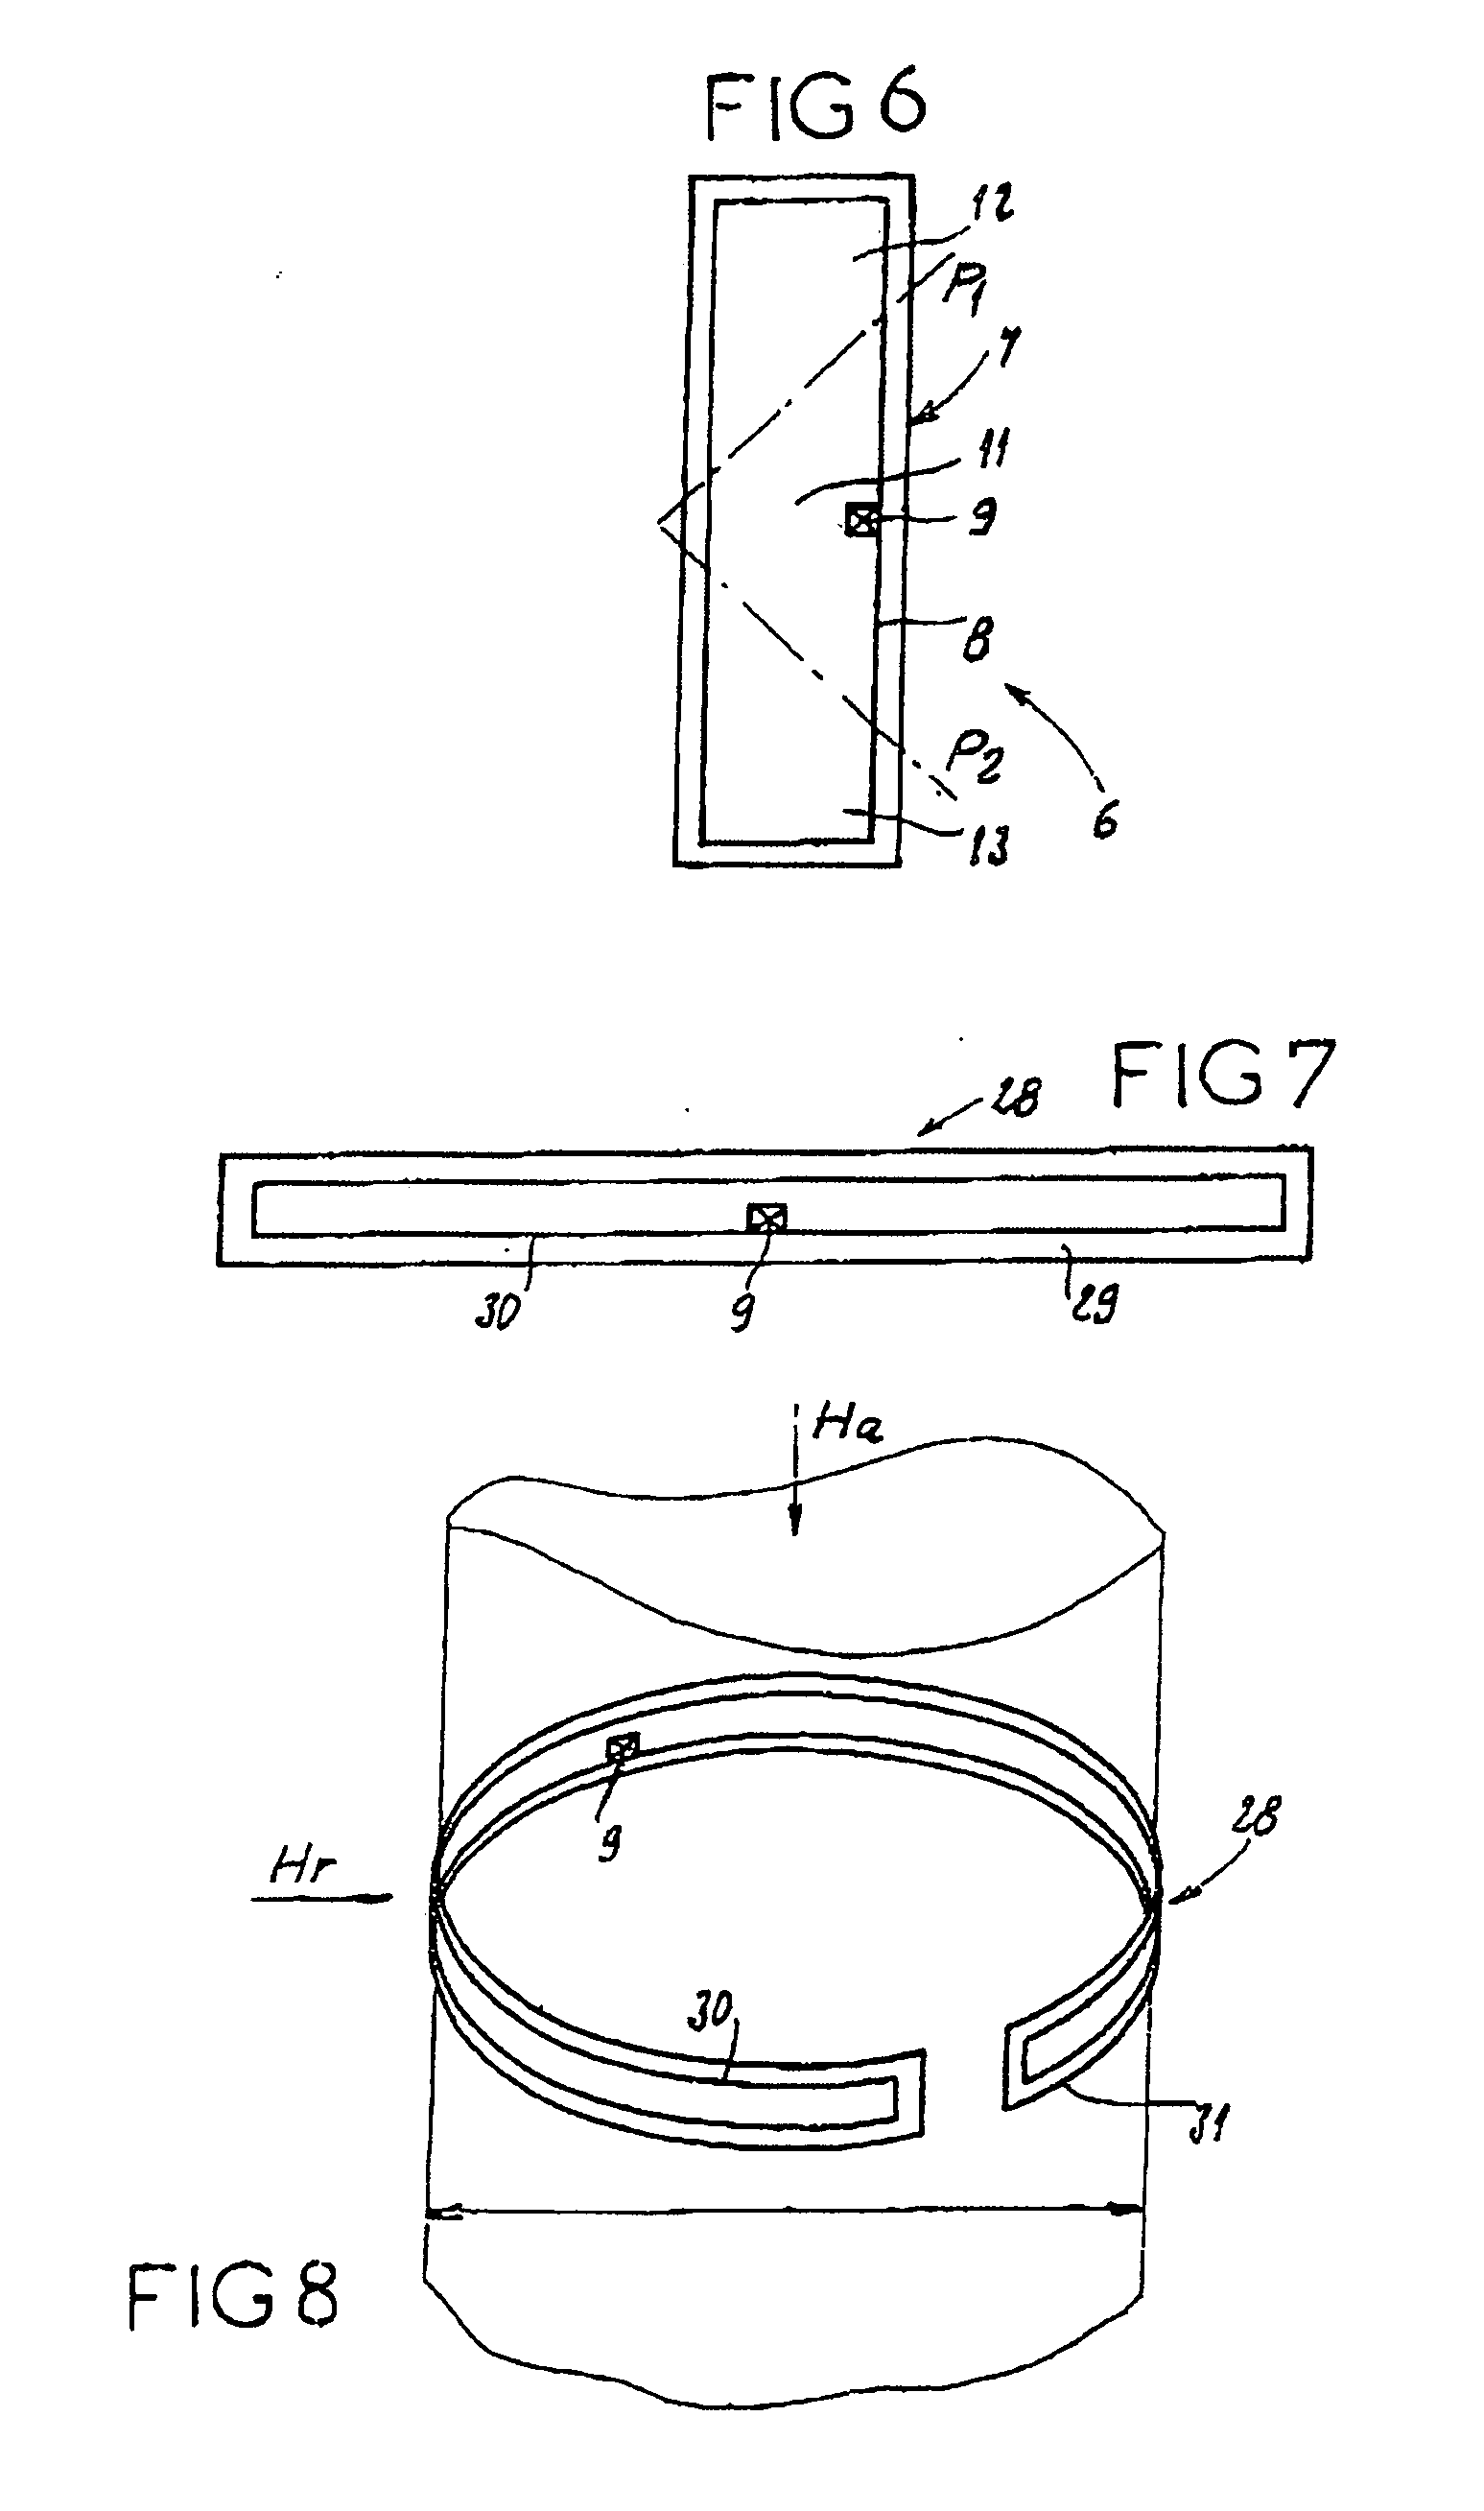 Passive Transmitter Receiver Device Fed by an Electromagnetic Wave